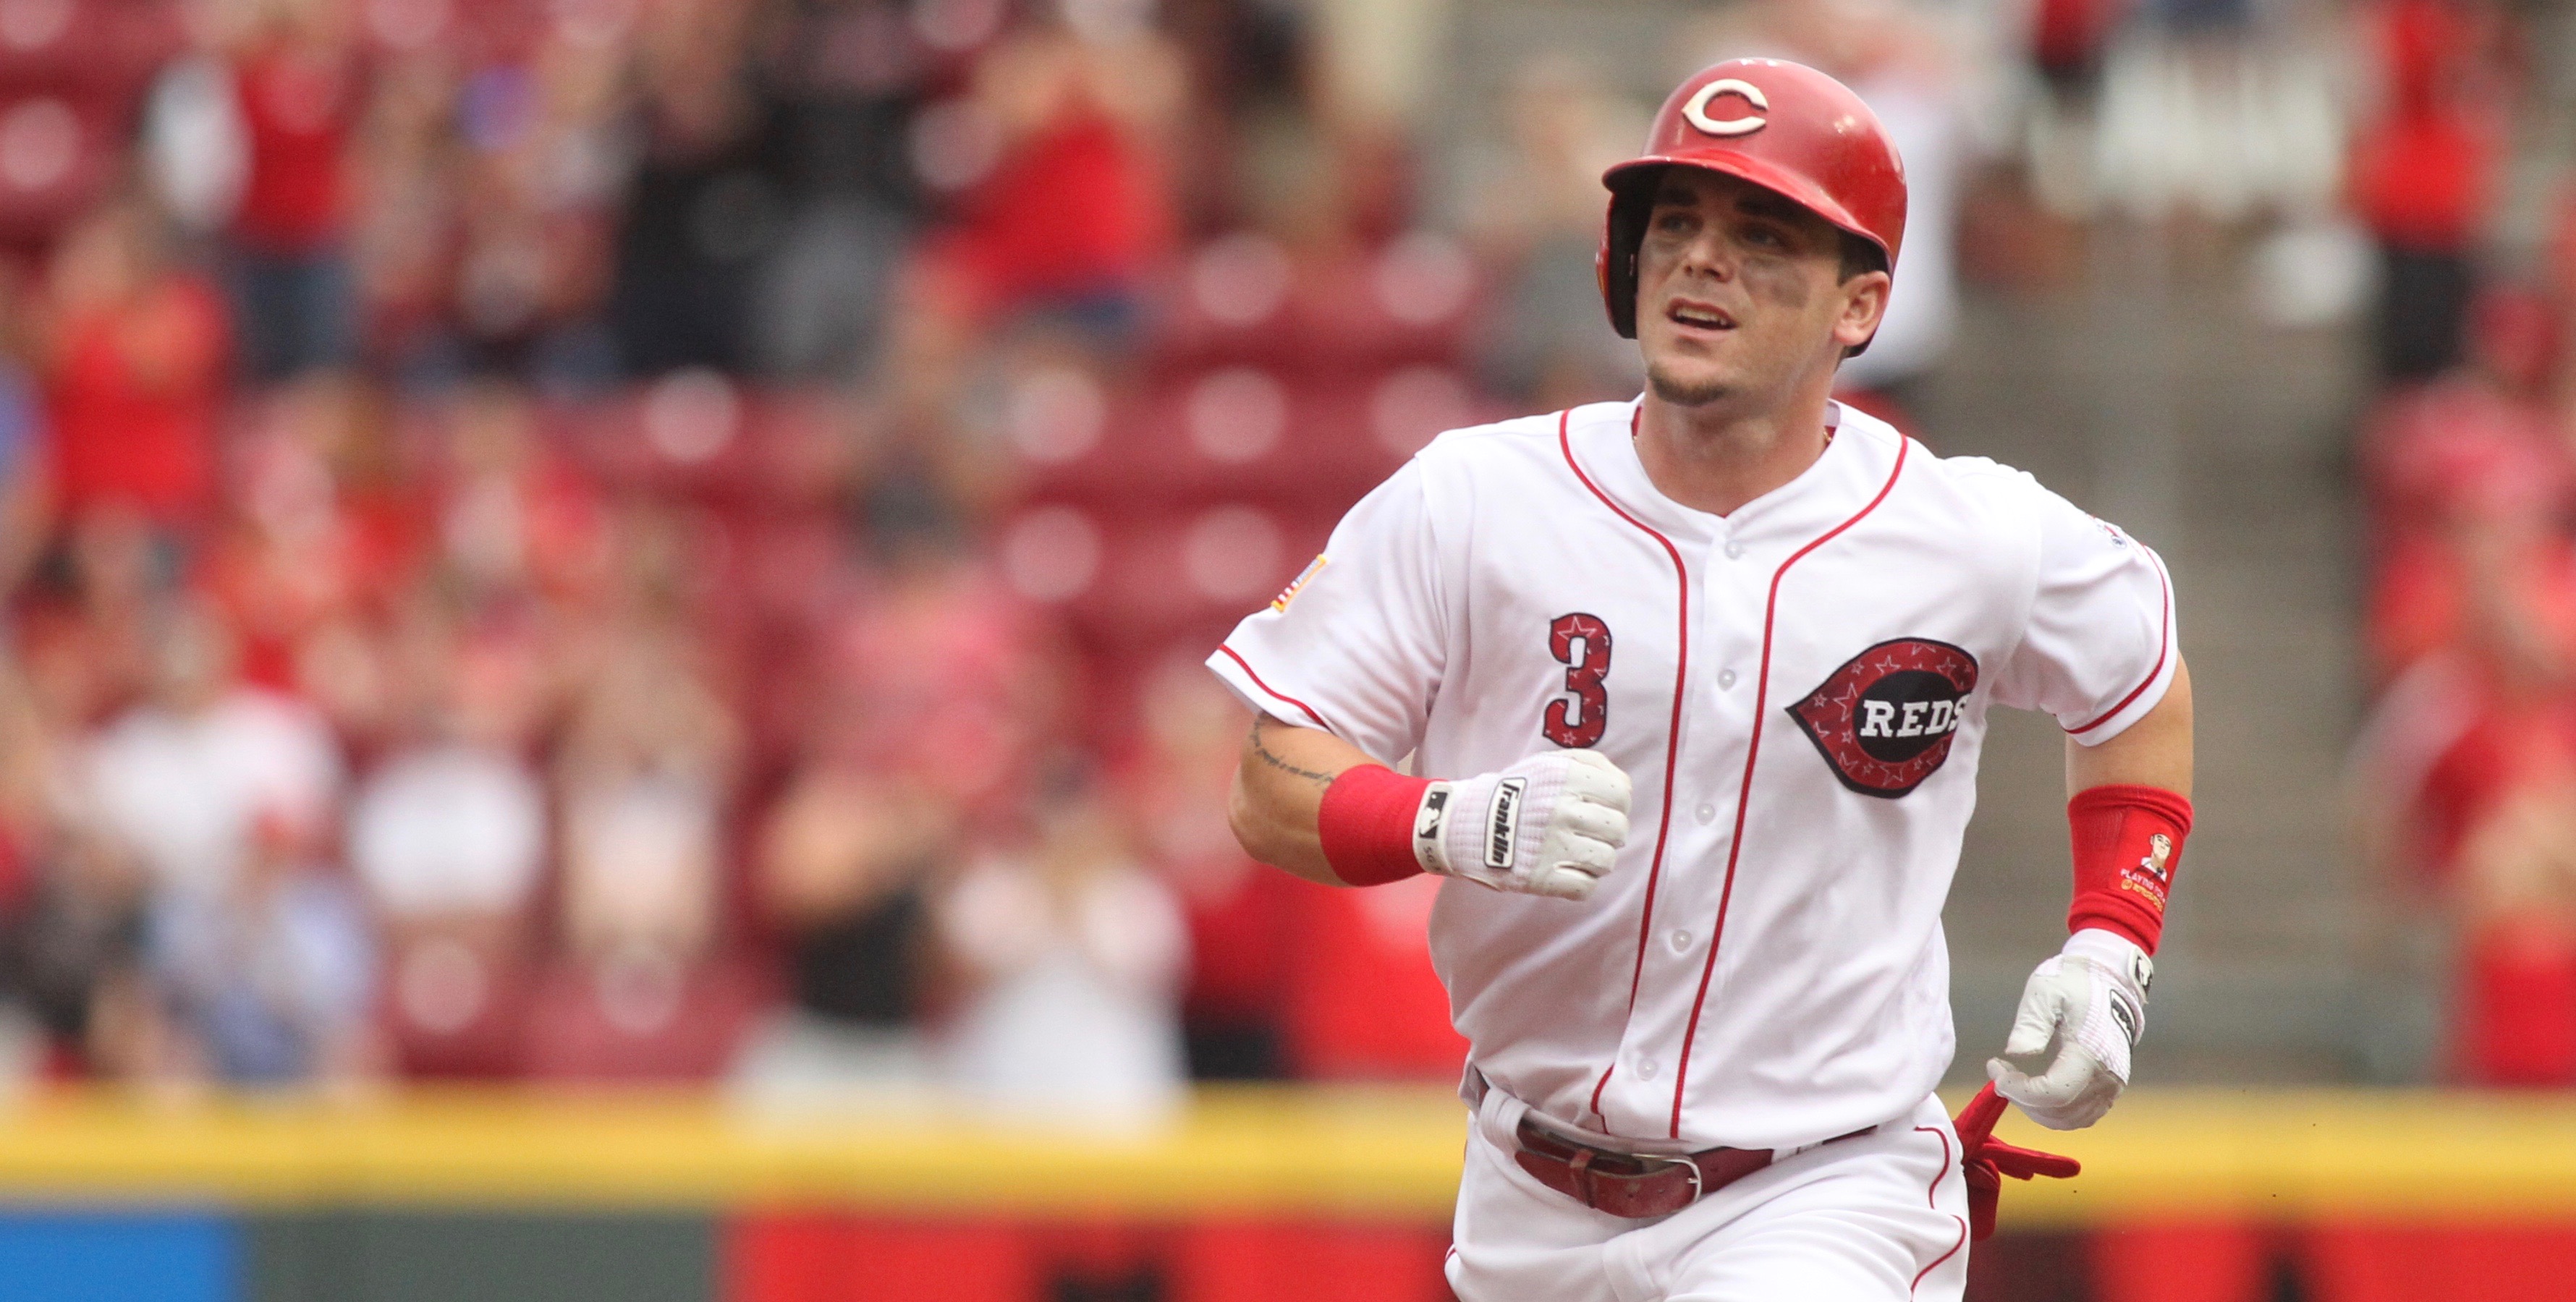 Jesse Winker's family was on hand to see the young prospect produce for the  Reds